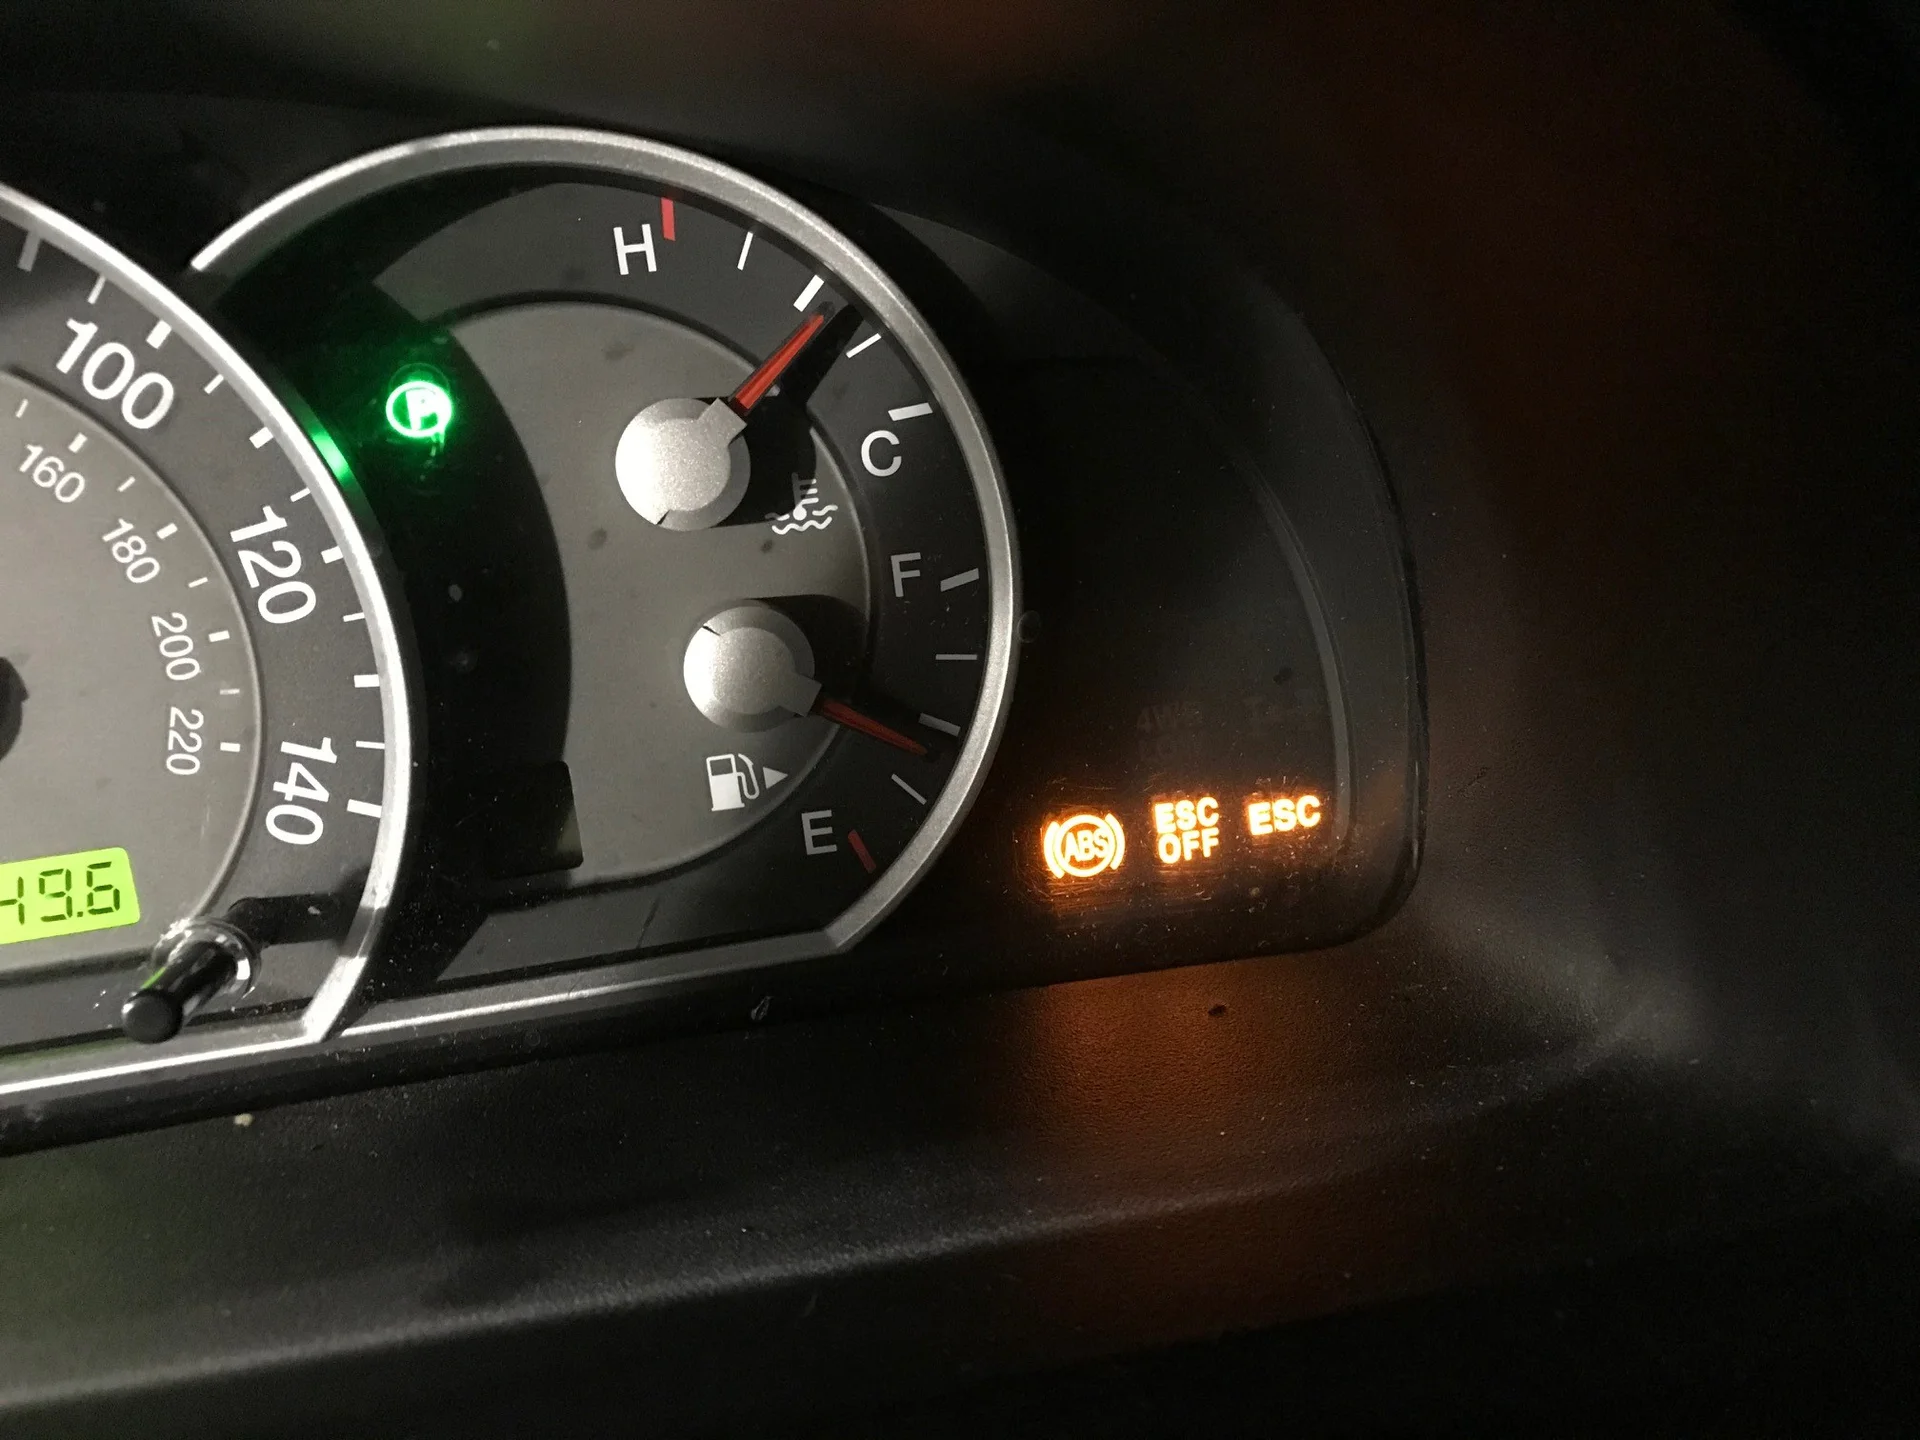 Traction Control Light On: Finding a Fix插图2